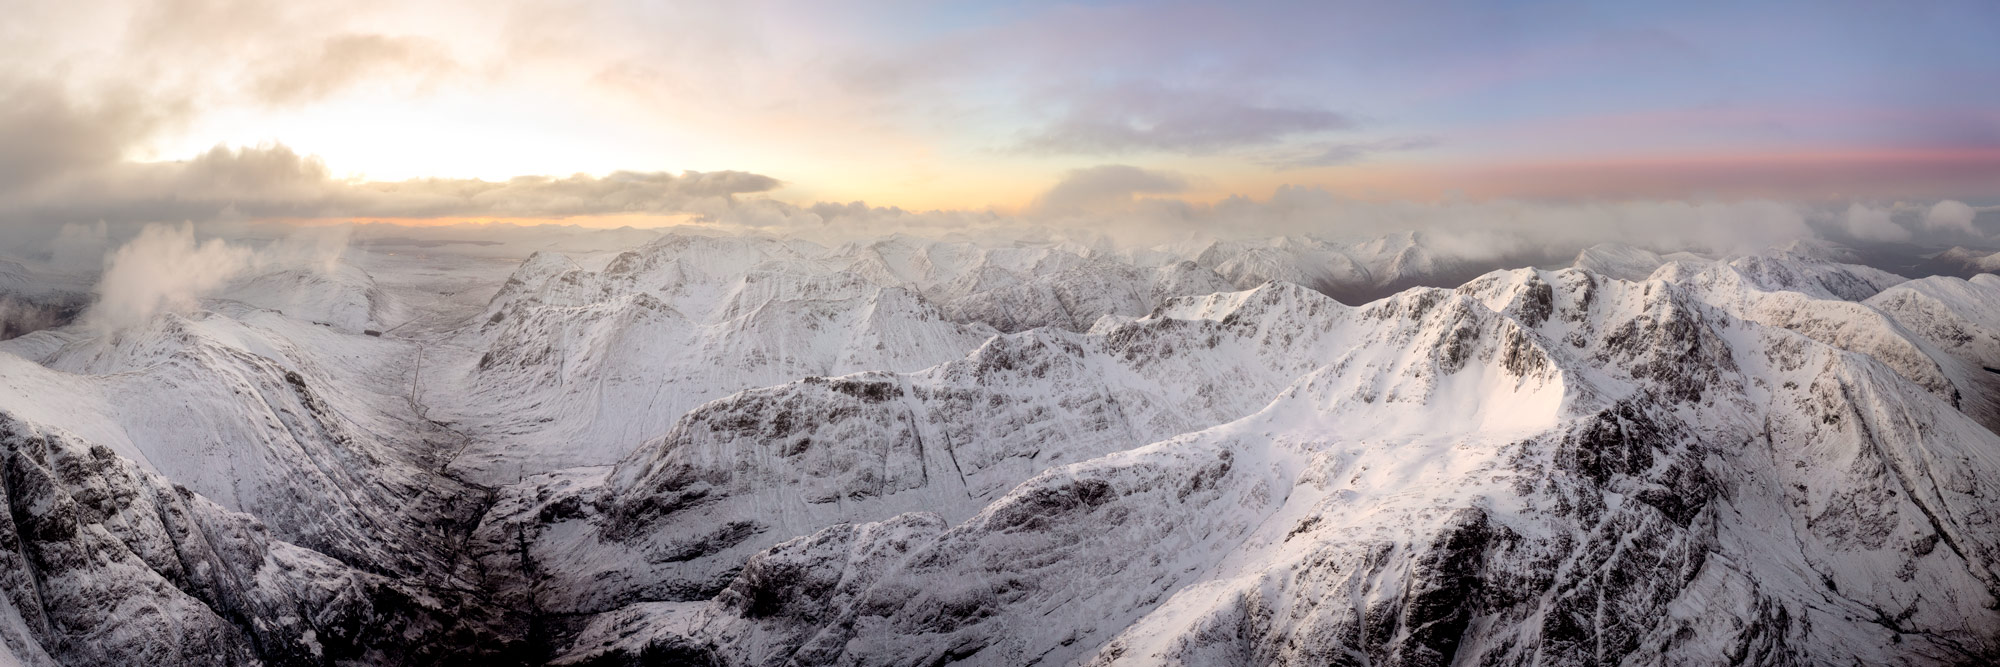 Panorama the three sisters mountains covered in snow at sunrise in Glencoe Scottish highlands